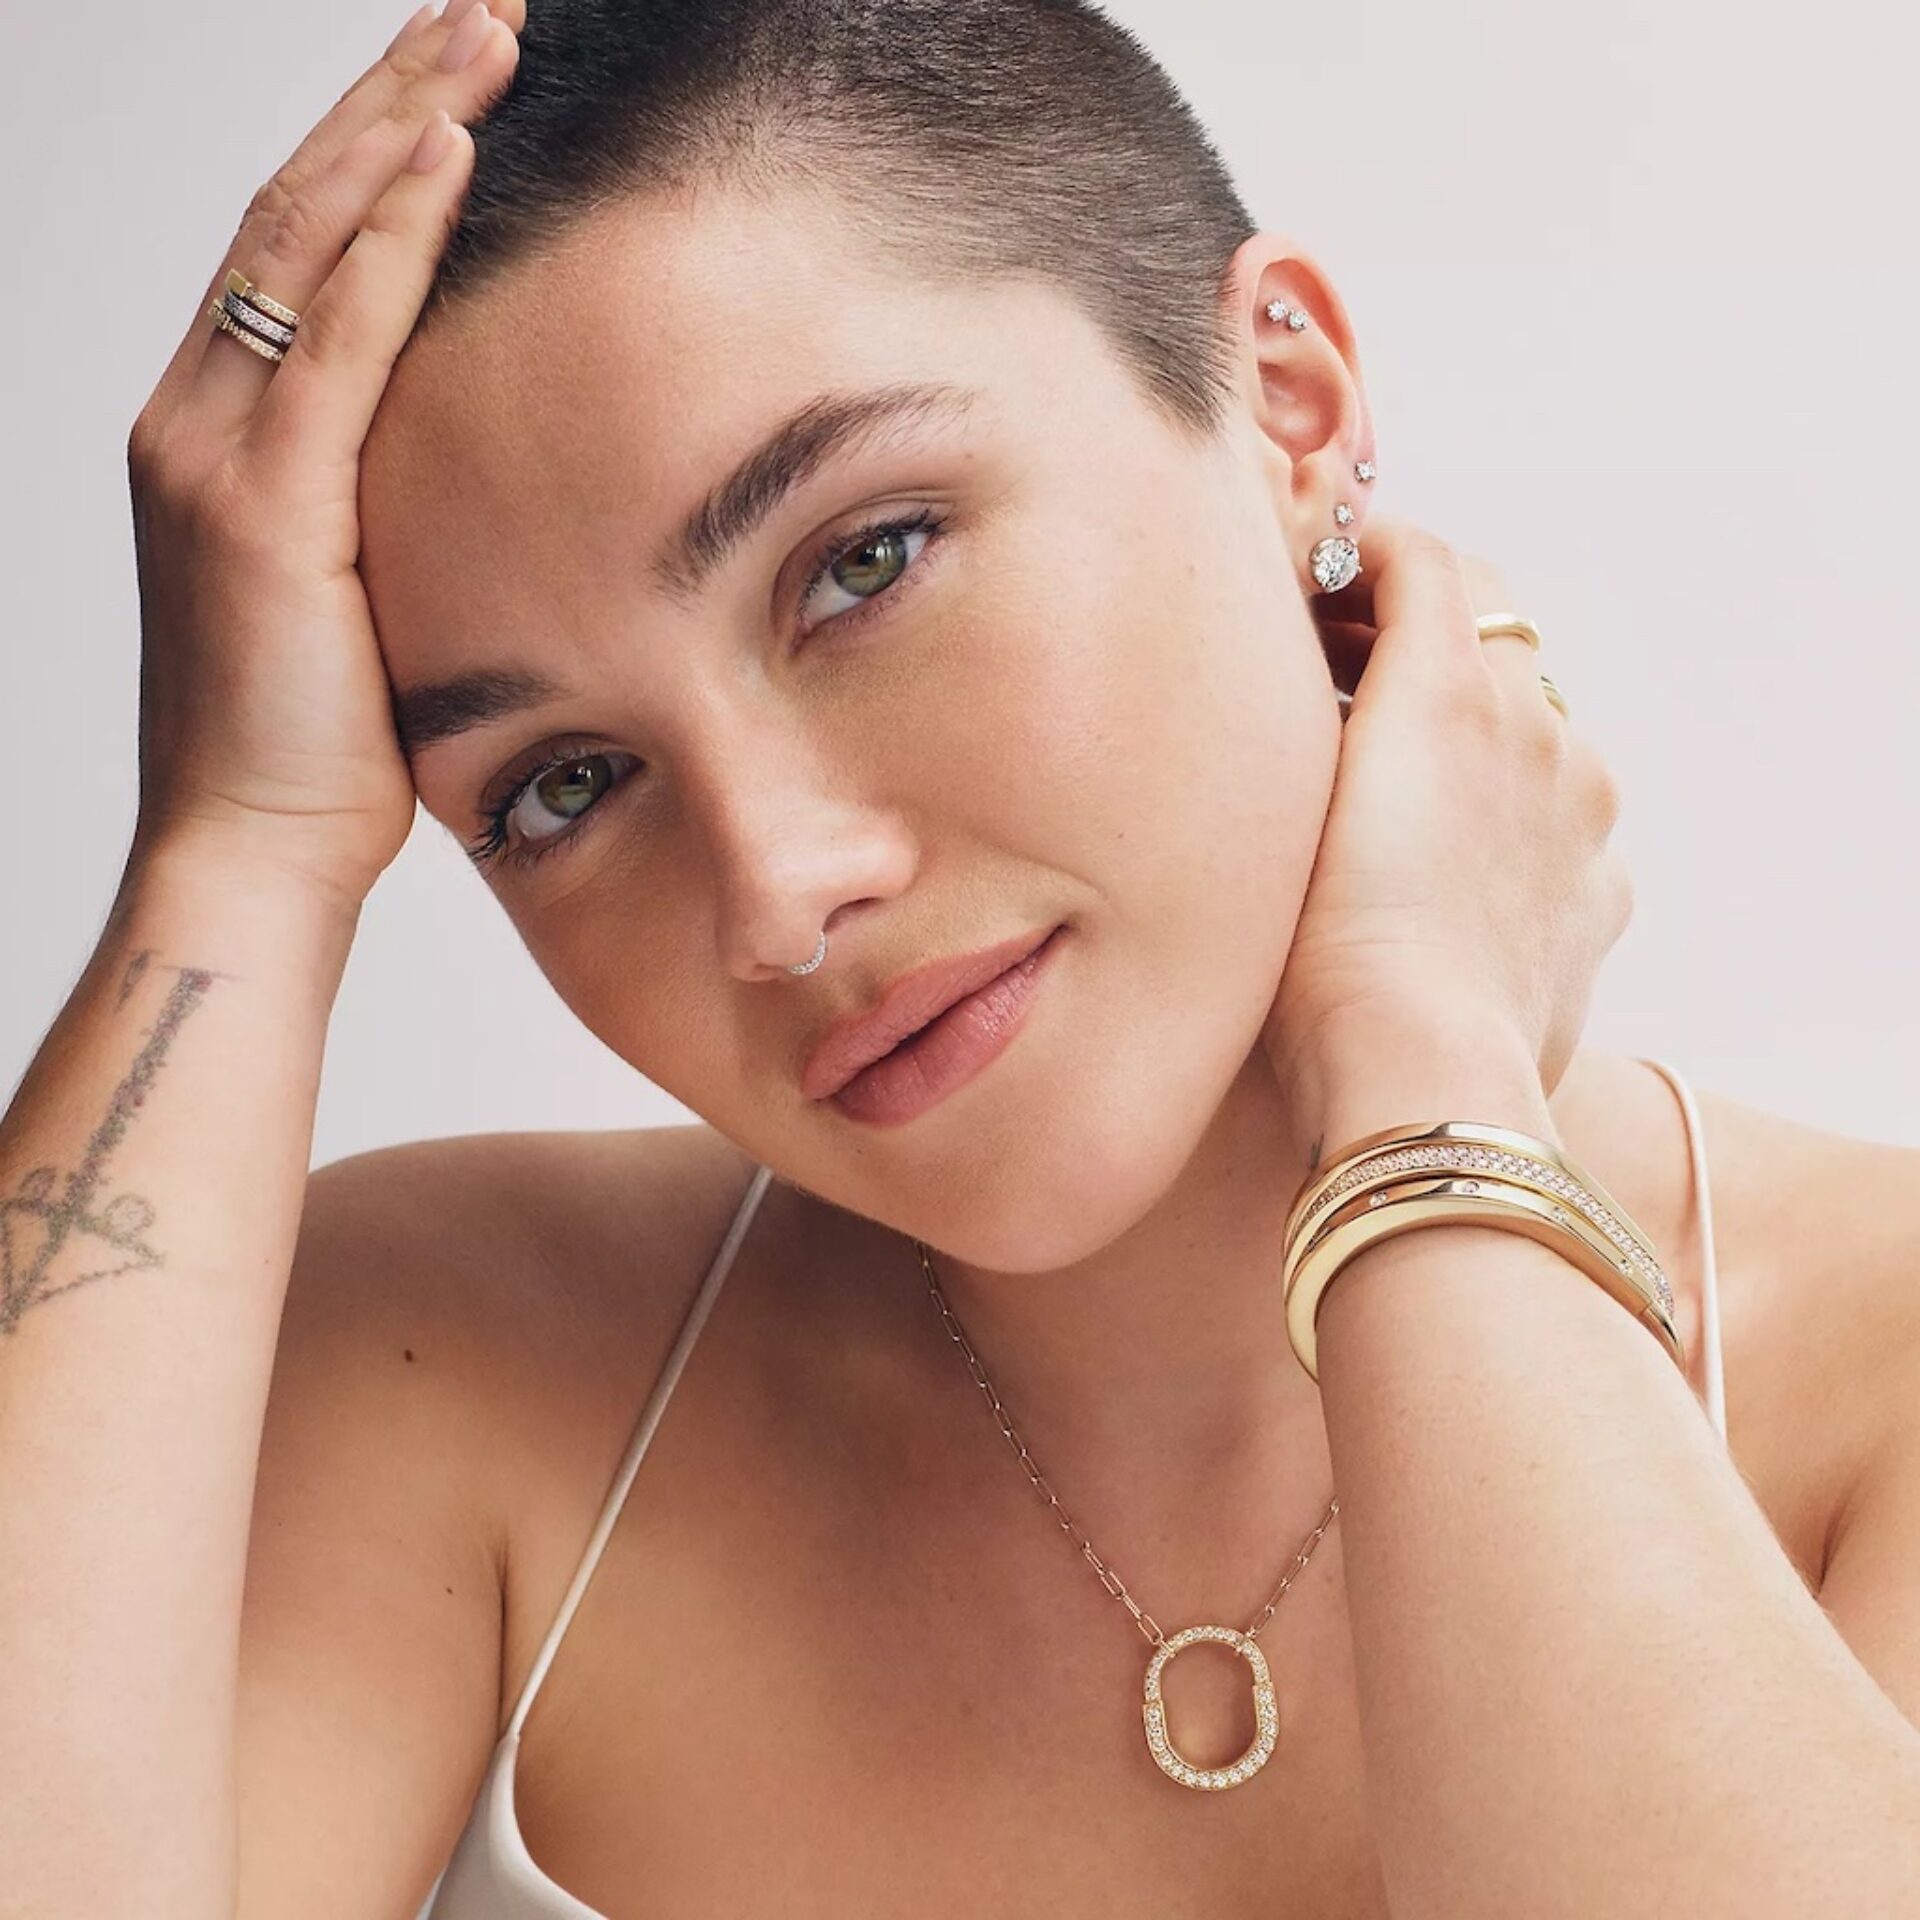 Florence Pugh brings back her signature Met Gala buzz cut for Tiffany and Co.'s latest campaign. The Oppenheimer star adds elegance to the new 'Lock' designs.